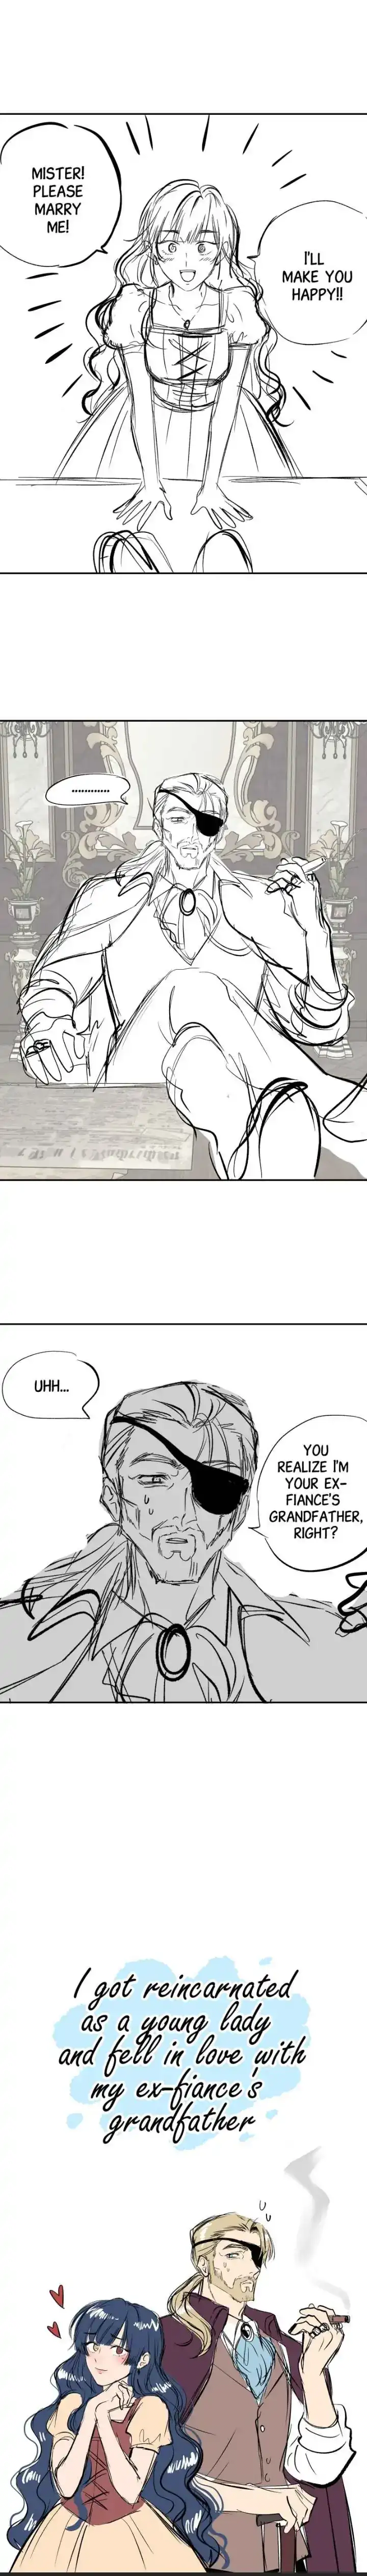 Falling in Love With My Ex-fiancé's Grandfather chapter 1 - page 1